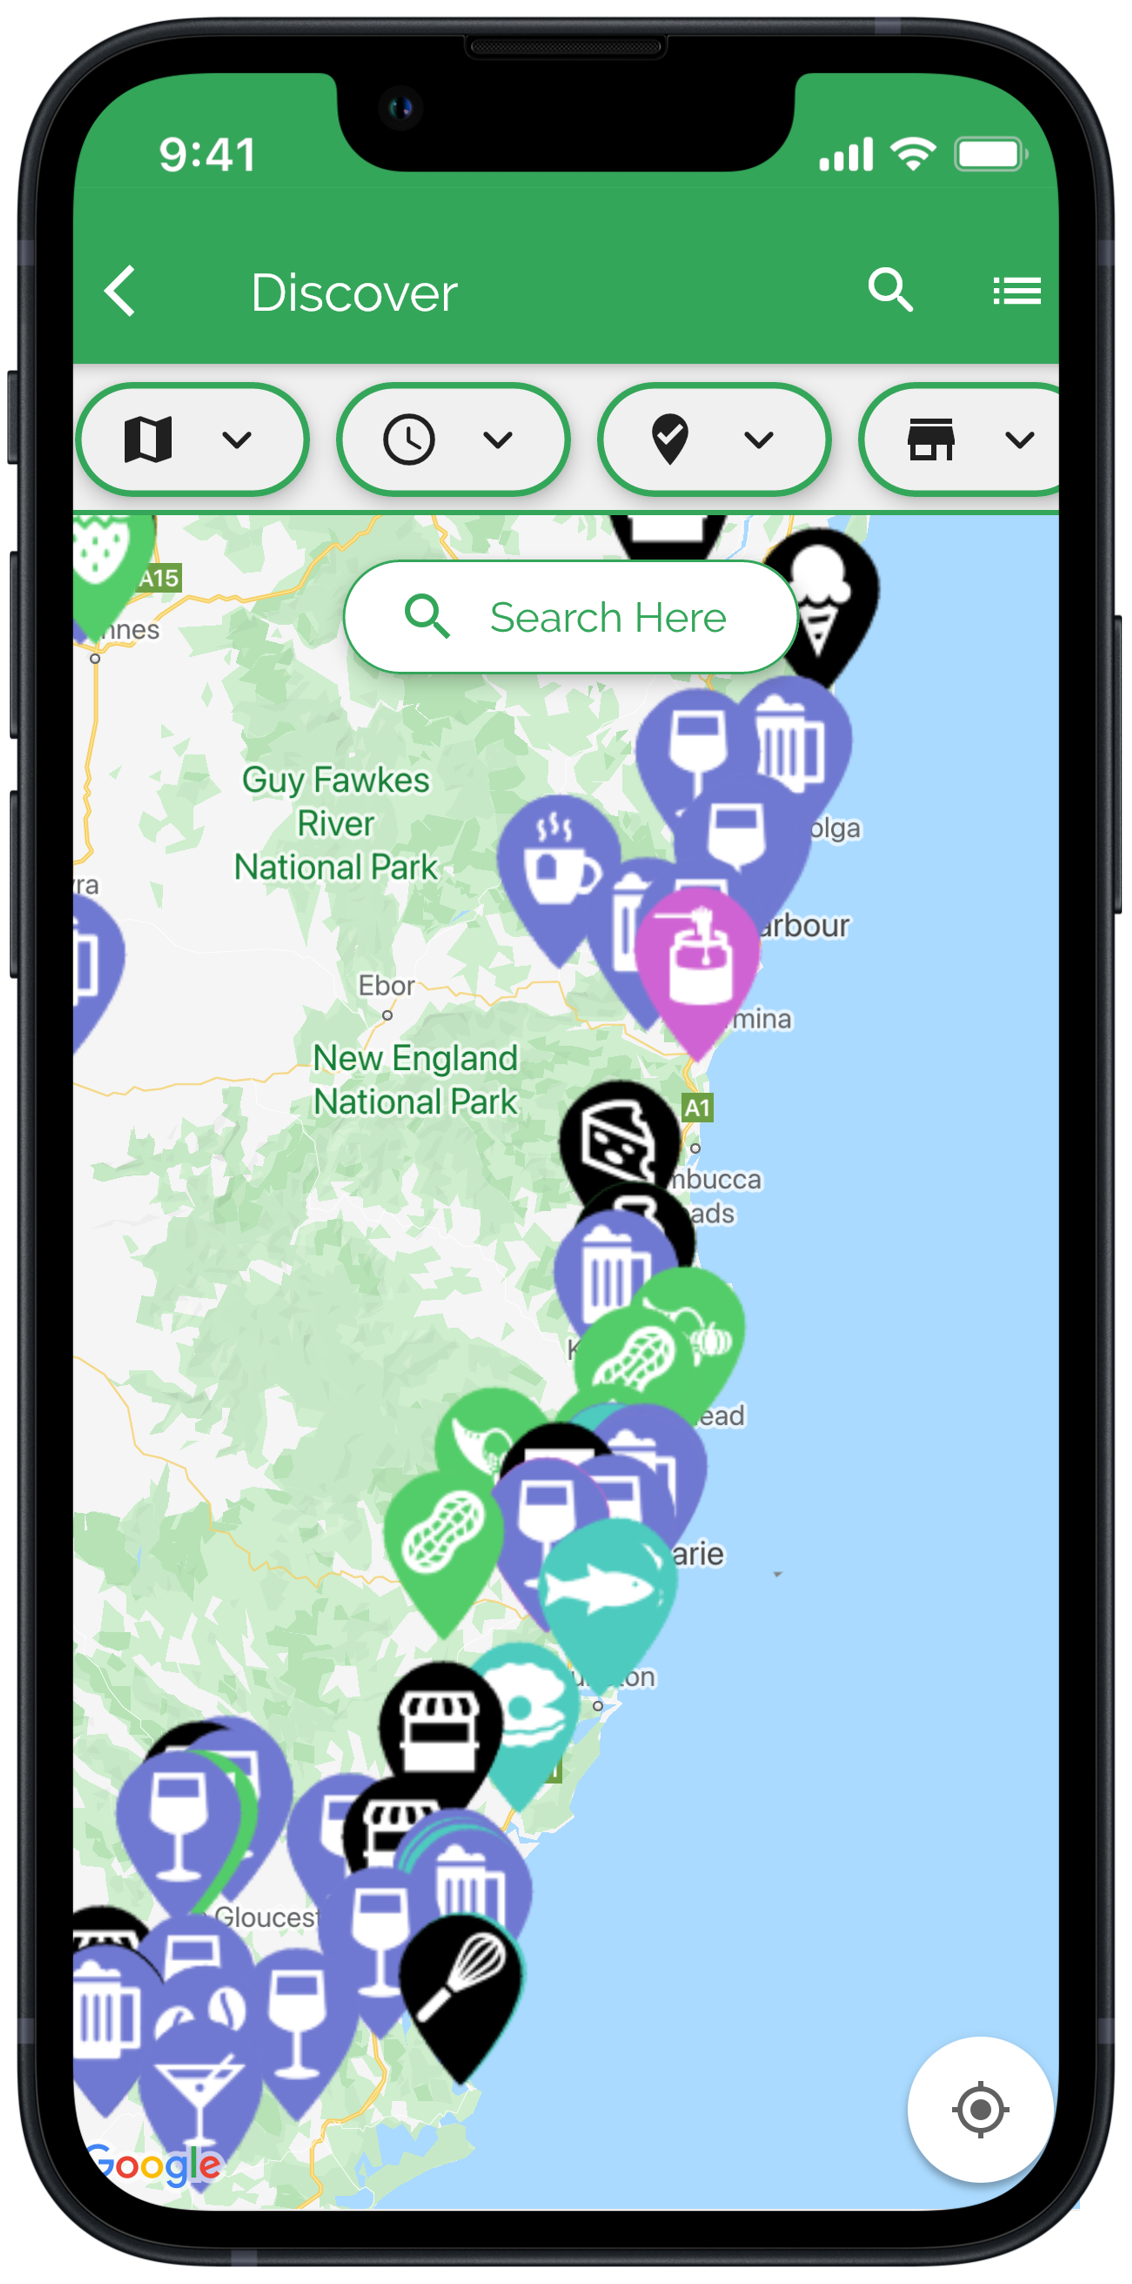 An iPhone displaying the Gourmakers app interface with a map featuring pins for points of interest